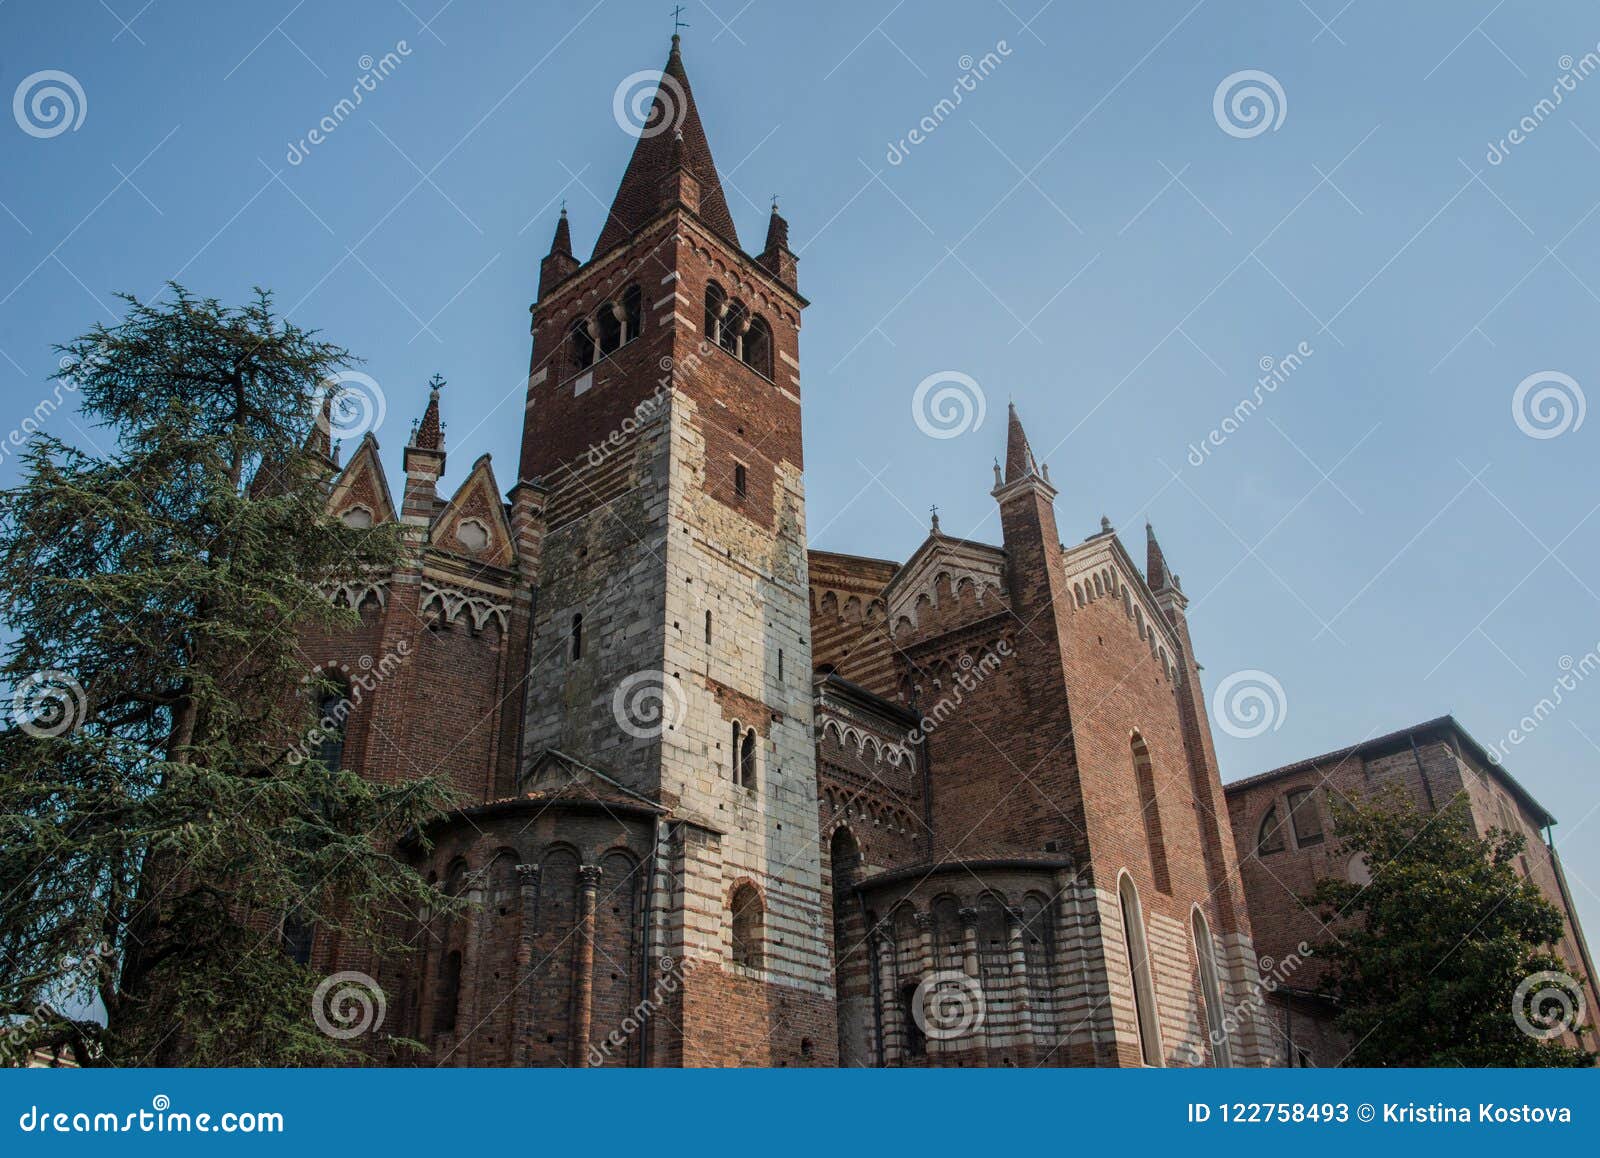 the church of the saints fermo and rustico in verona